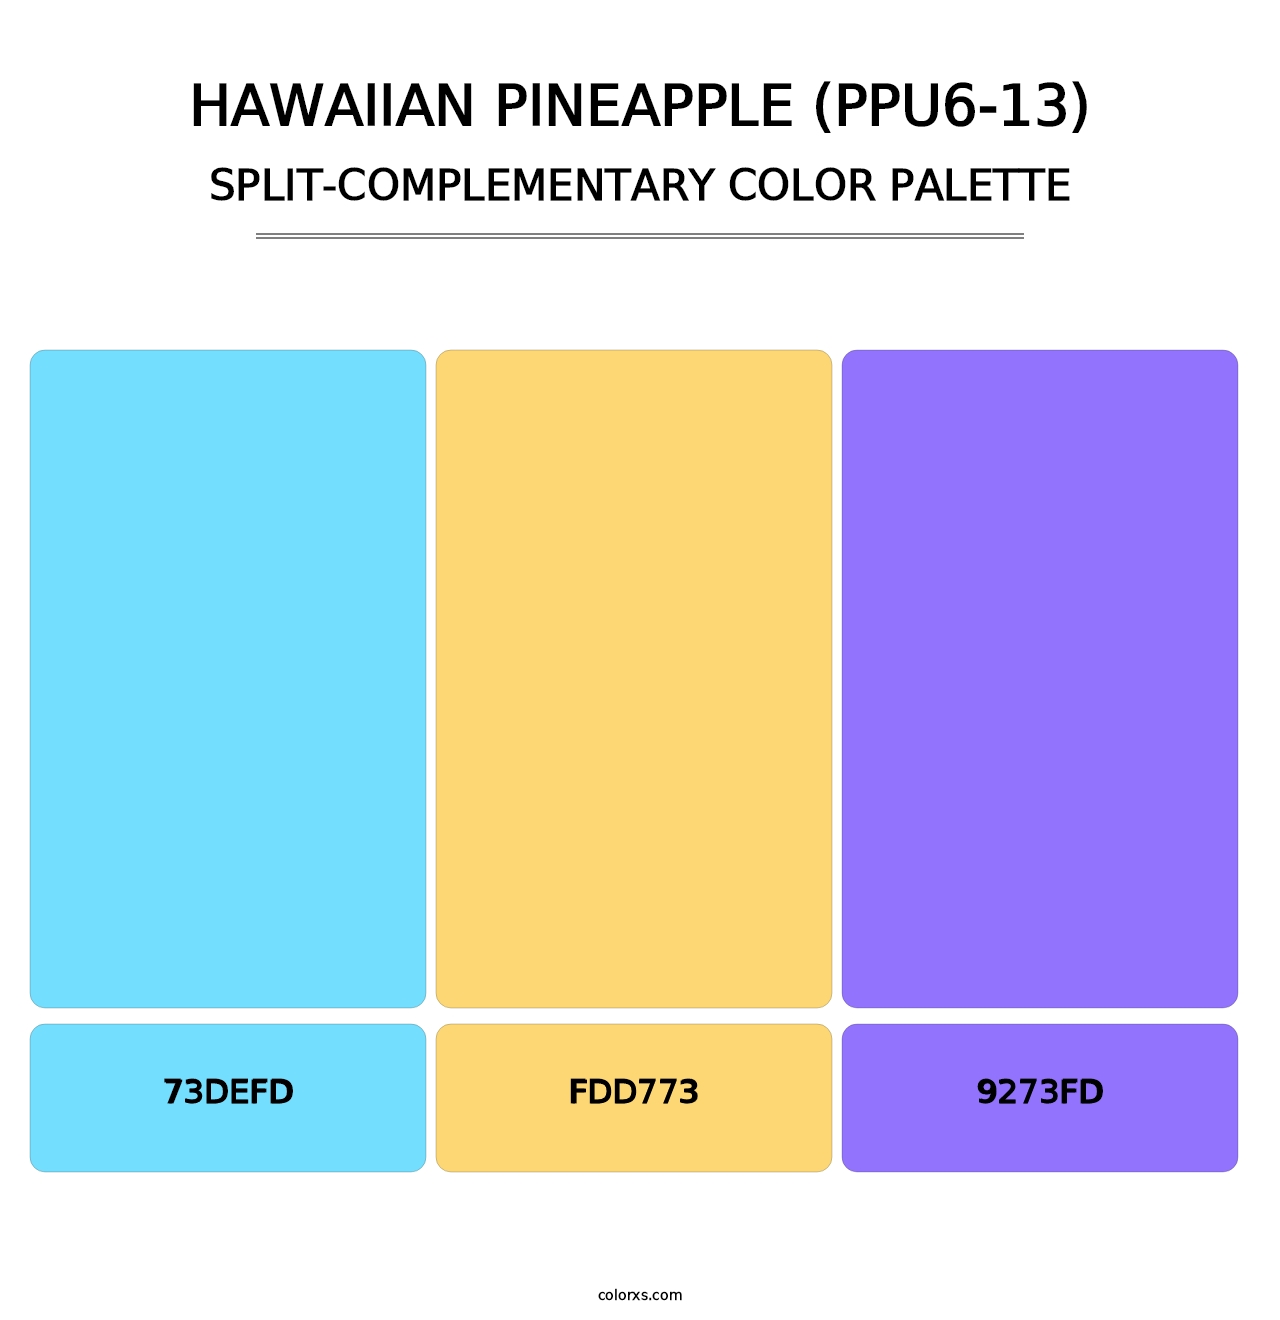 Hawaiian Pineapple (PPU6-13) - Split-Complementary Color Palette